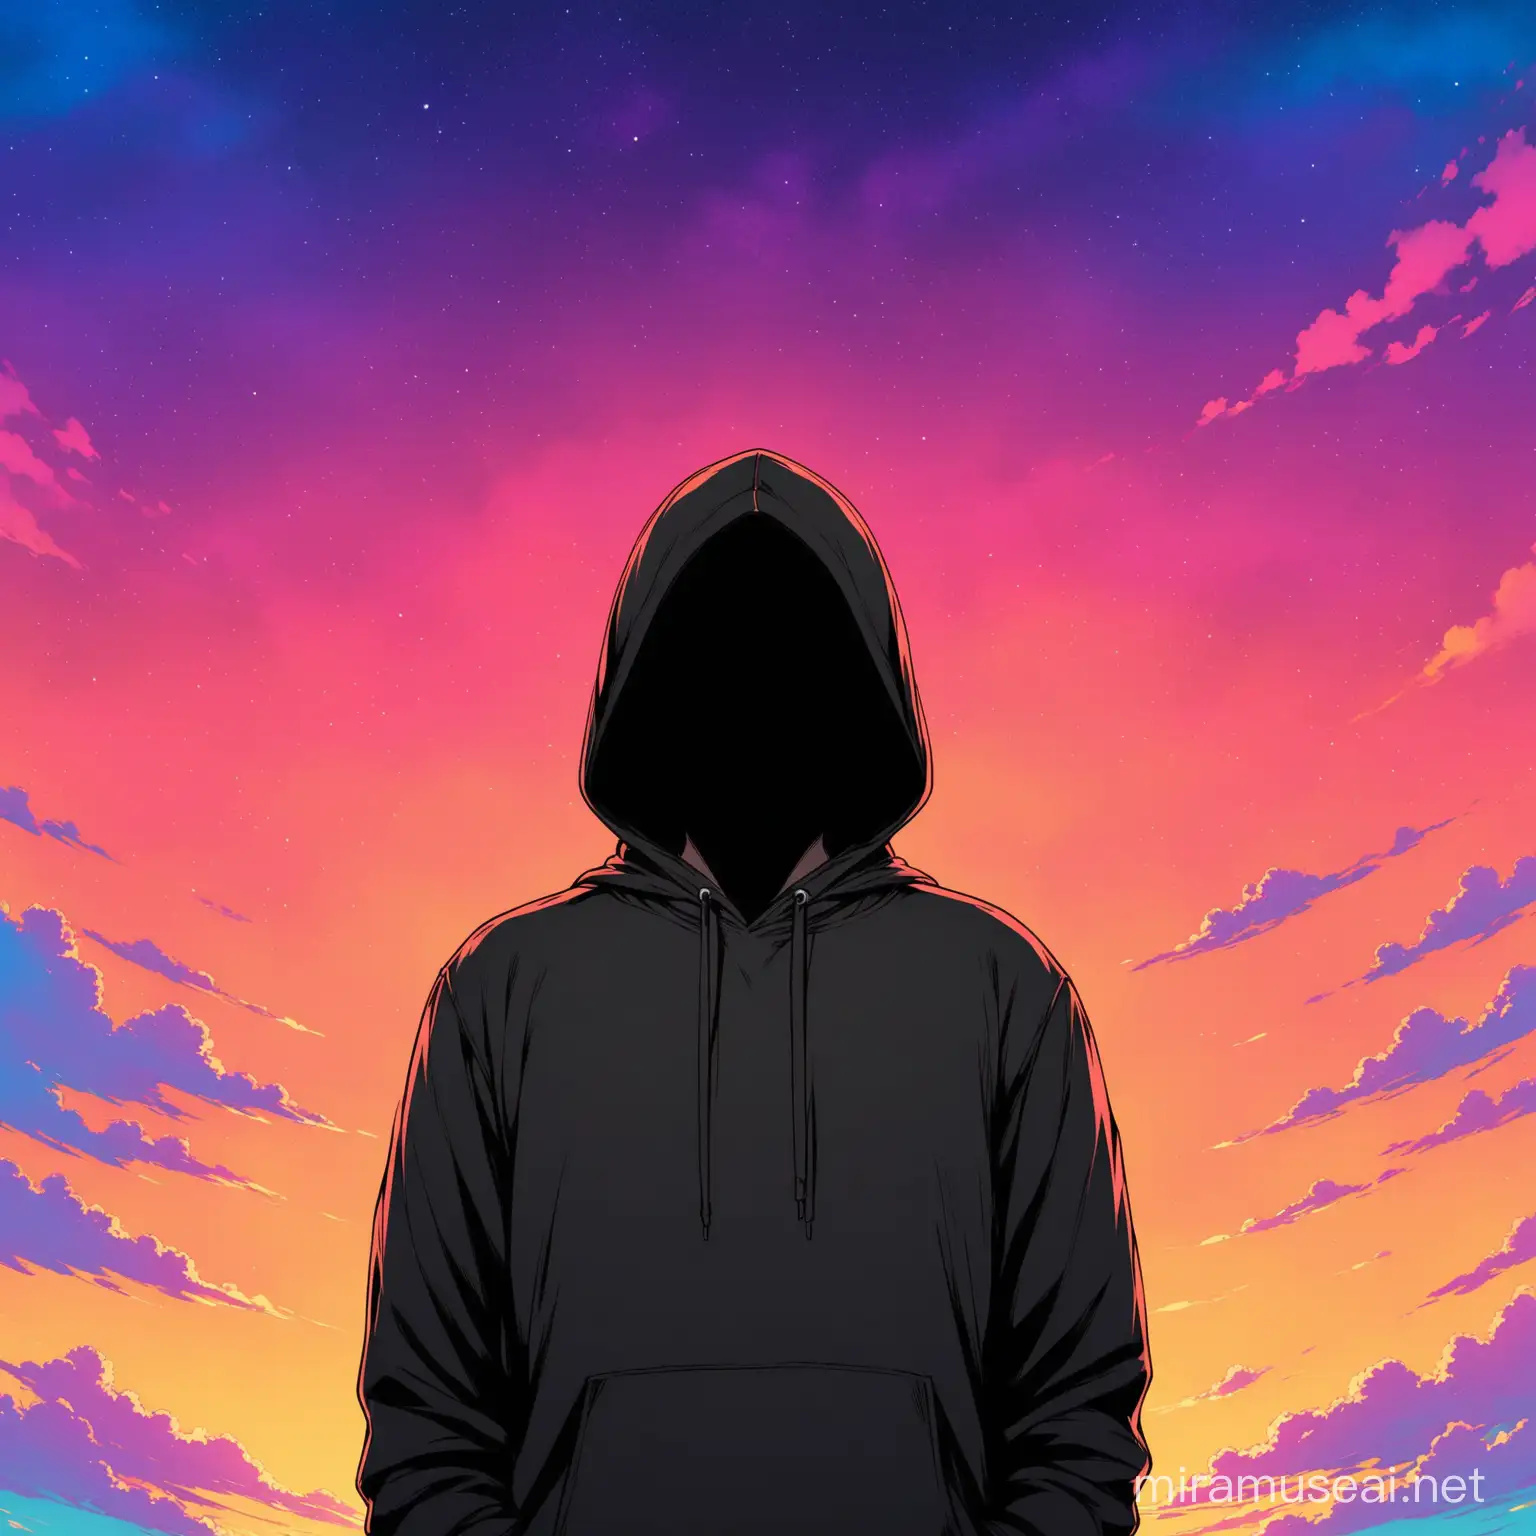 Mysterious Hooded Figure Against a Vivid Colorful Sky